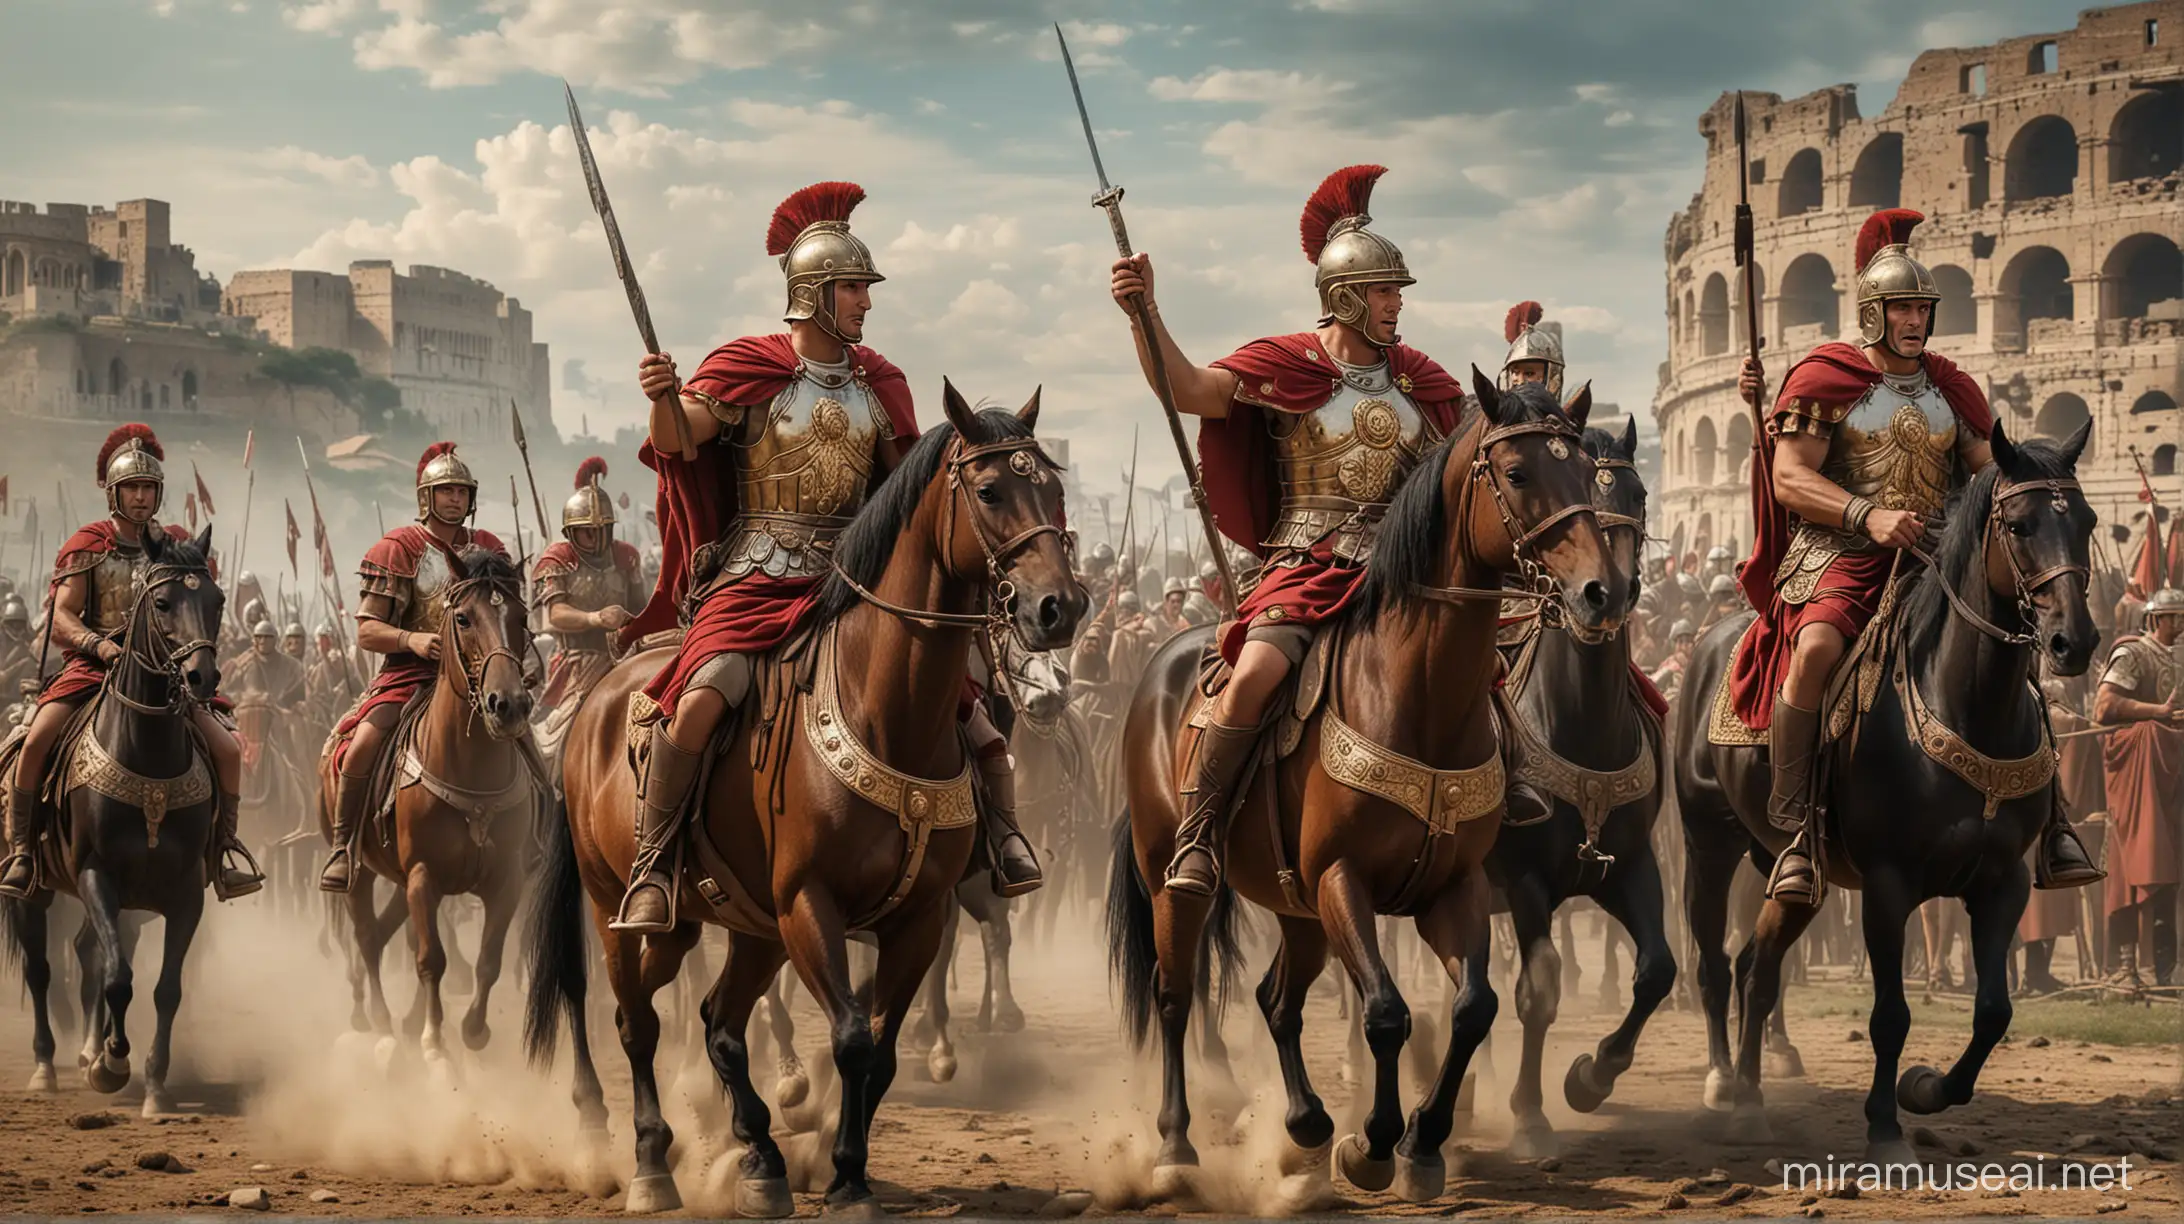 Roman soldiers riding horses in the Roman Empire